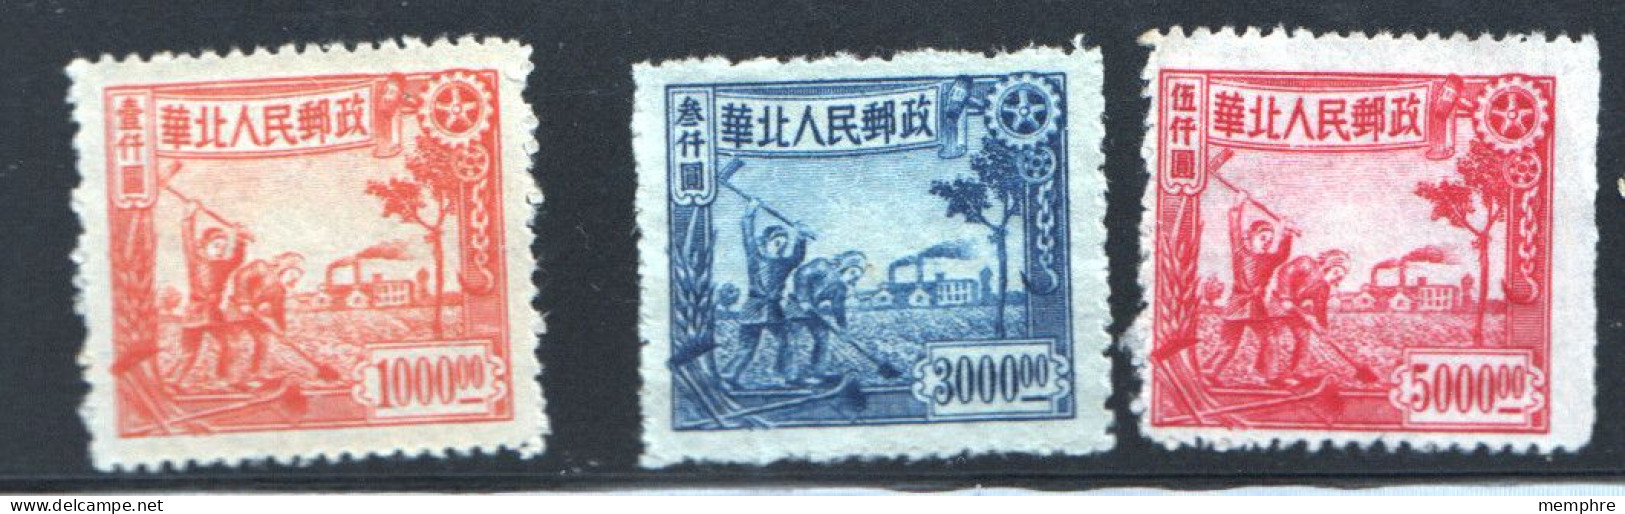 1949 North China Peasants And Actory Complete Set Of 3 Sc 3L96-8 No Gum, As Issued - Northern China 1949-50